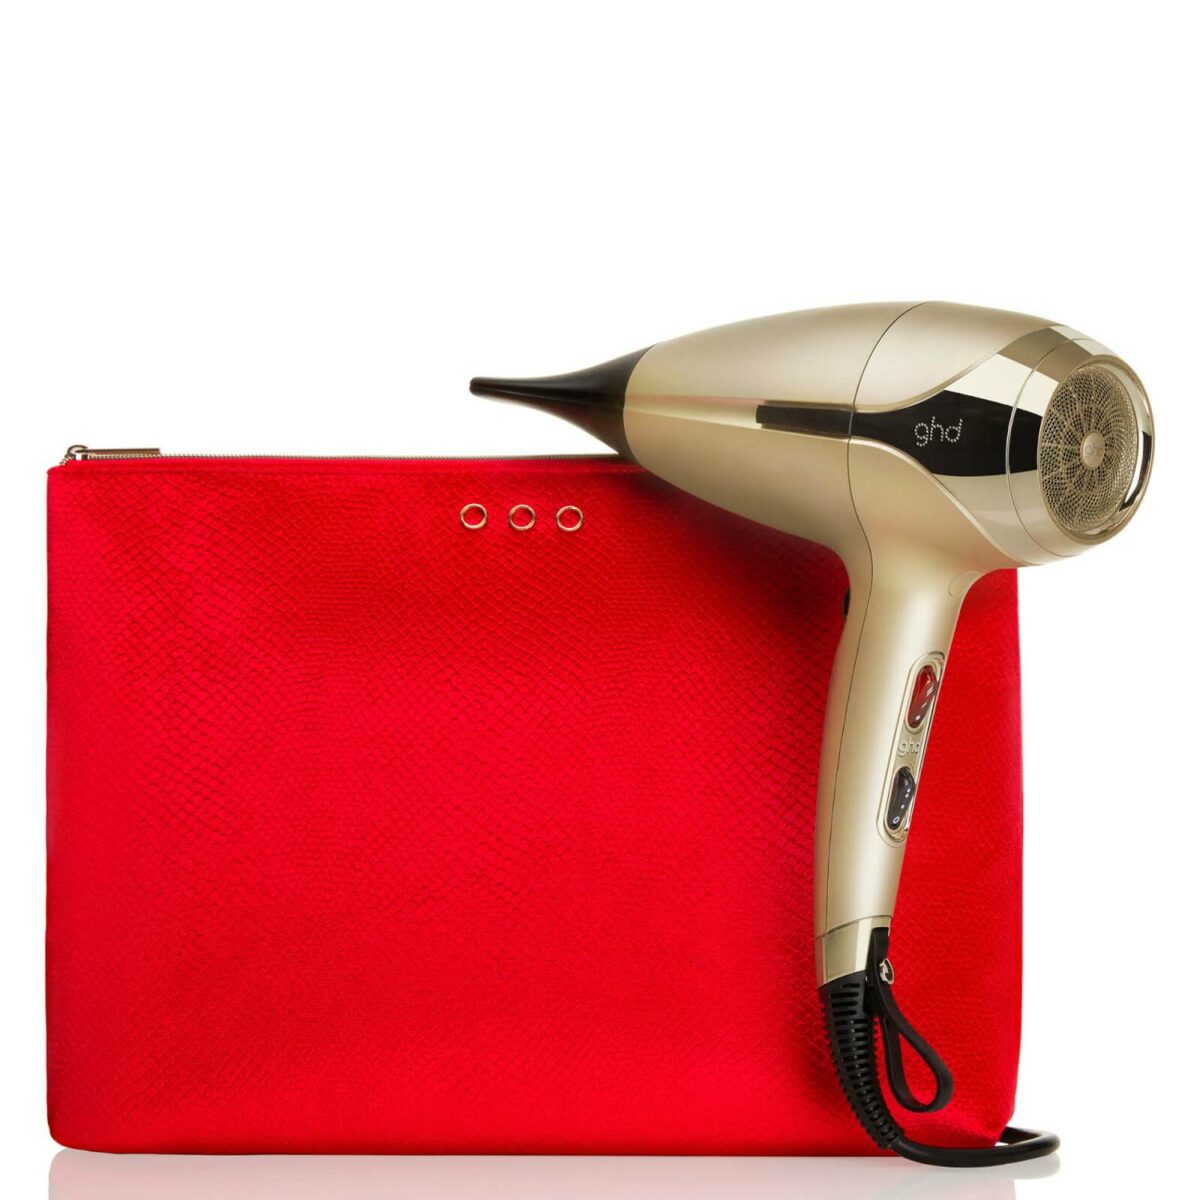 GHD Products to buy online in the UK from Spirit Hair Team.